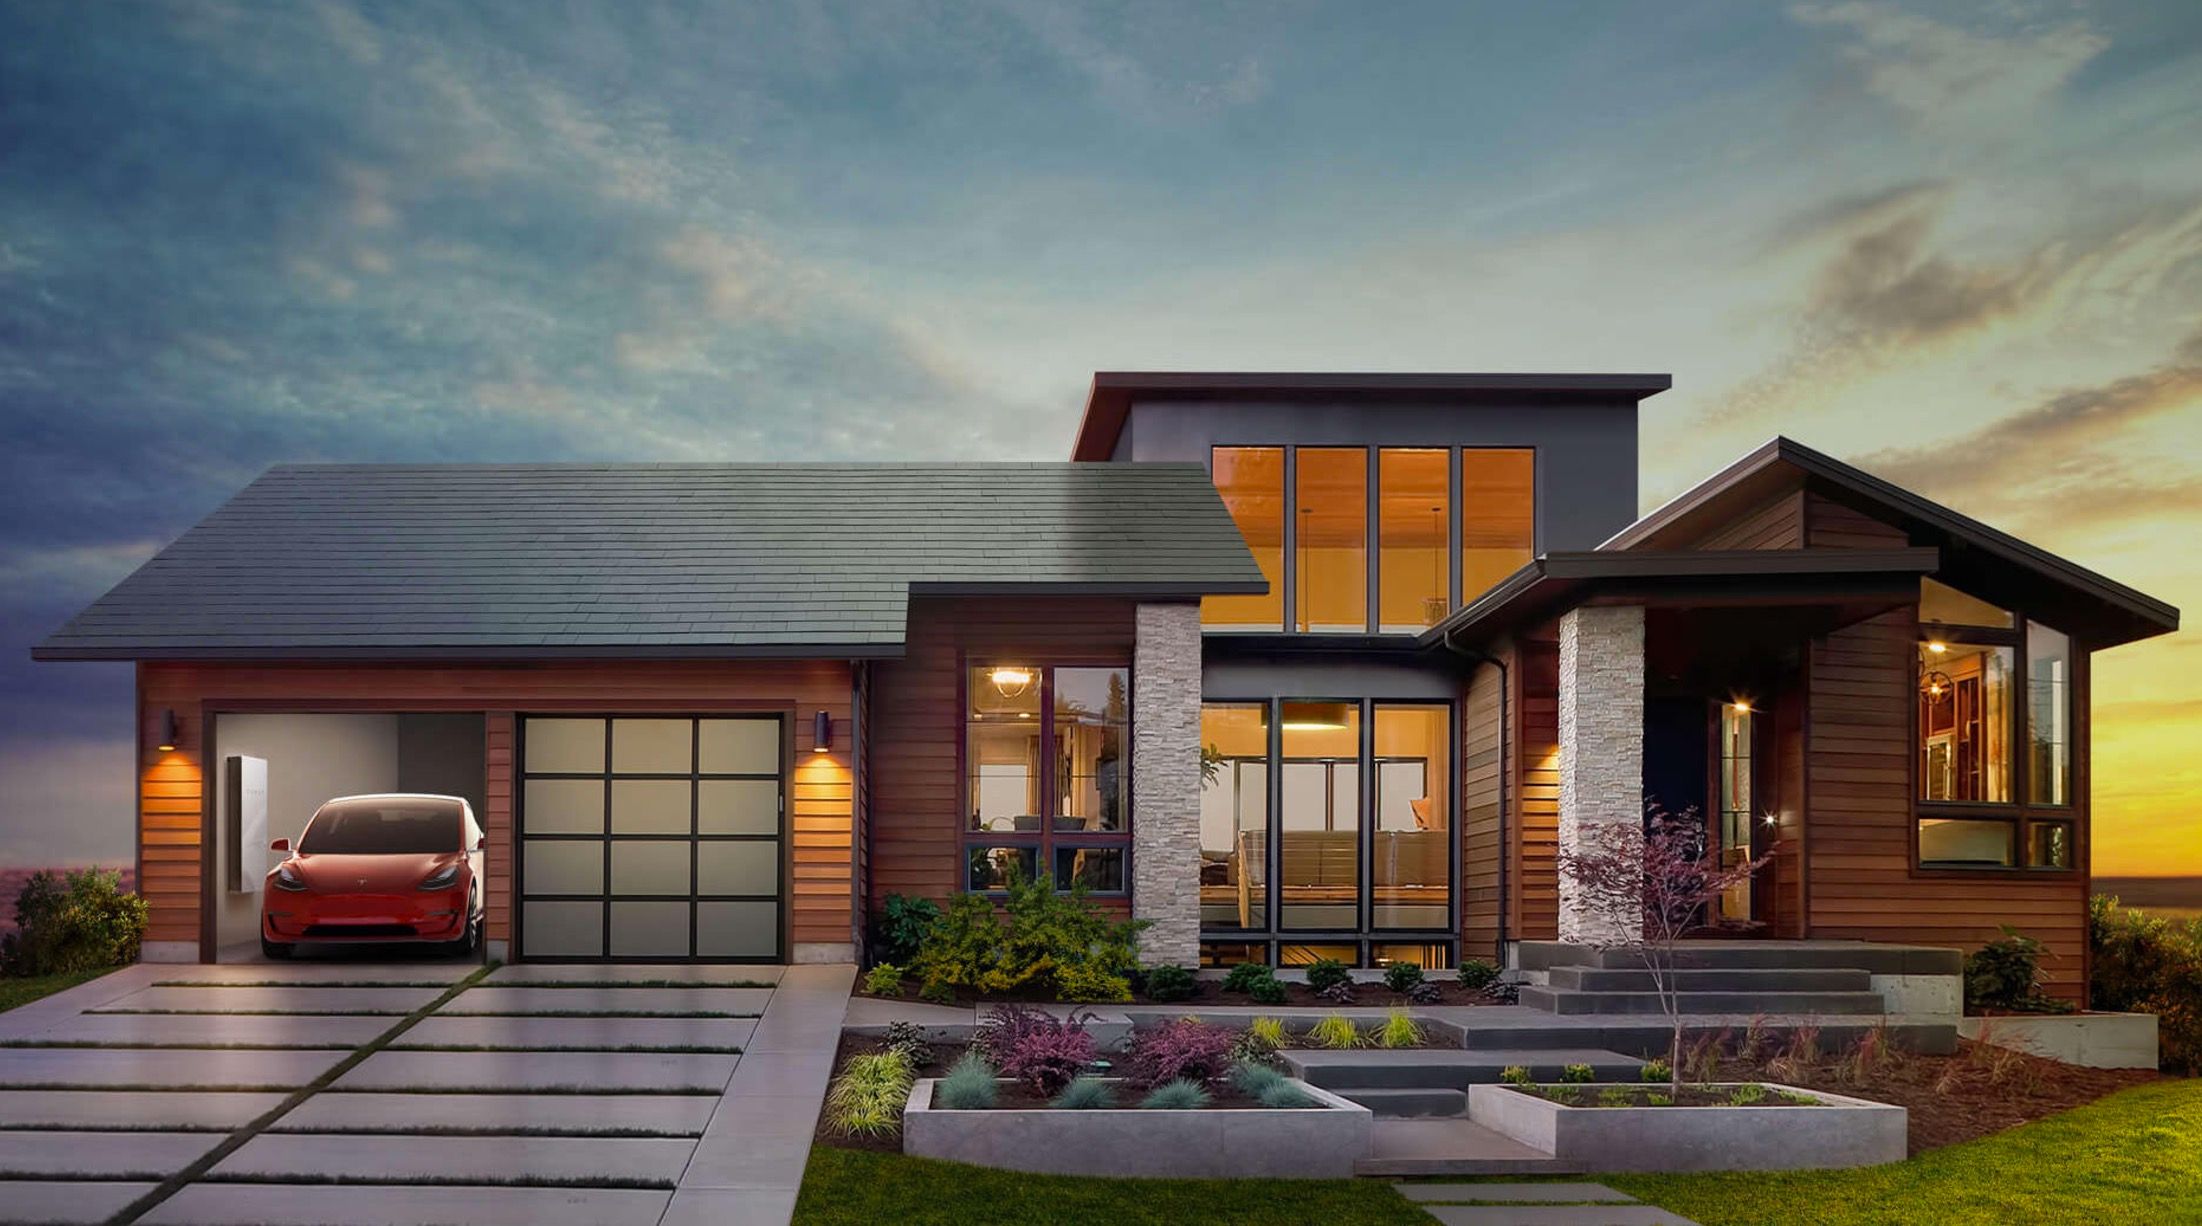 tesla solar roof everything you need to know image 3